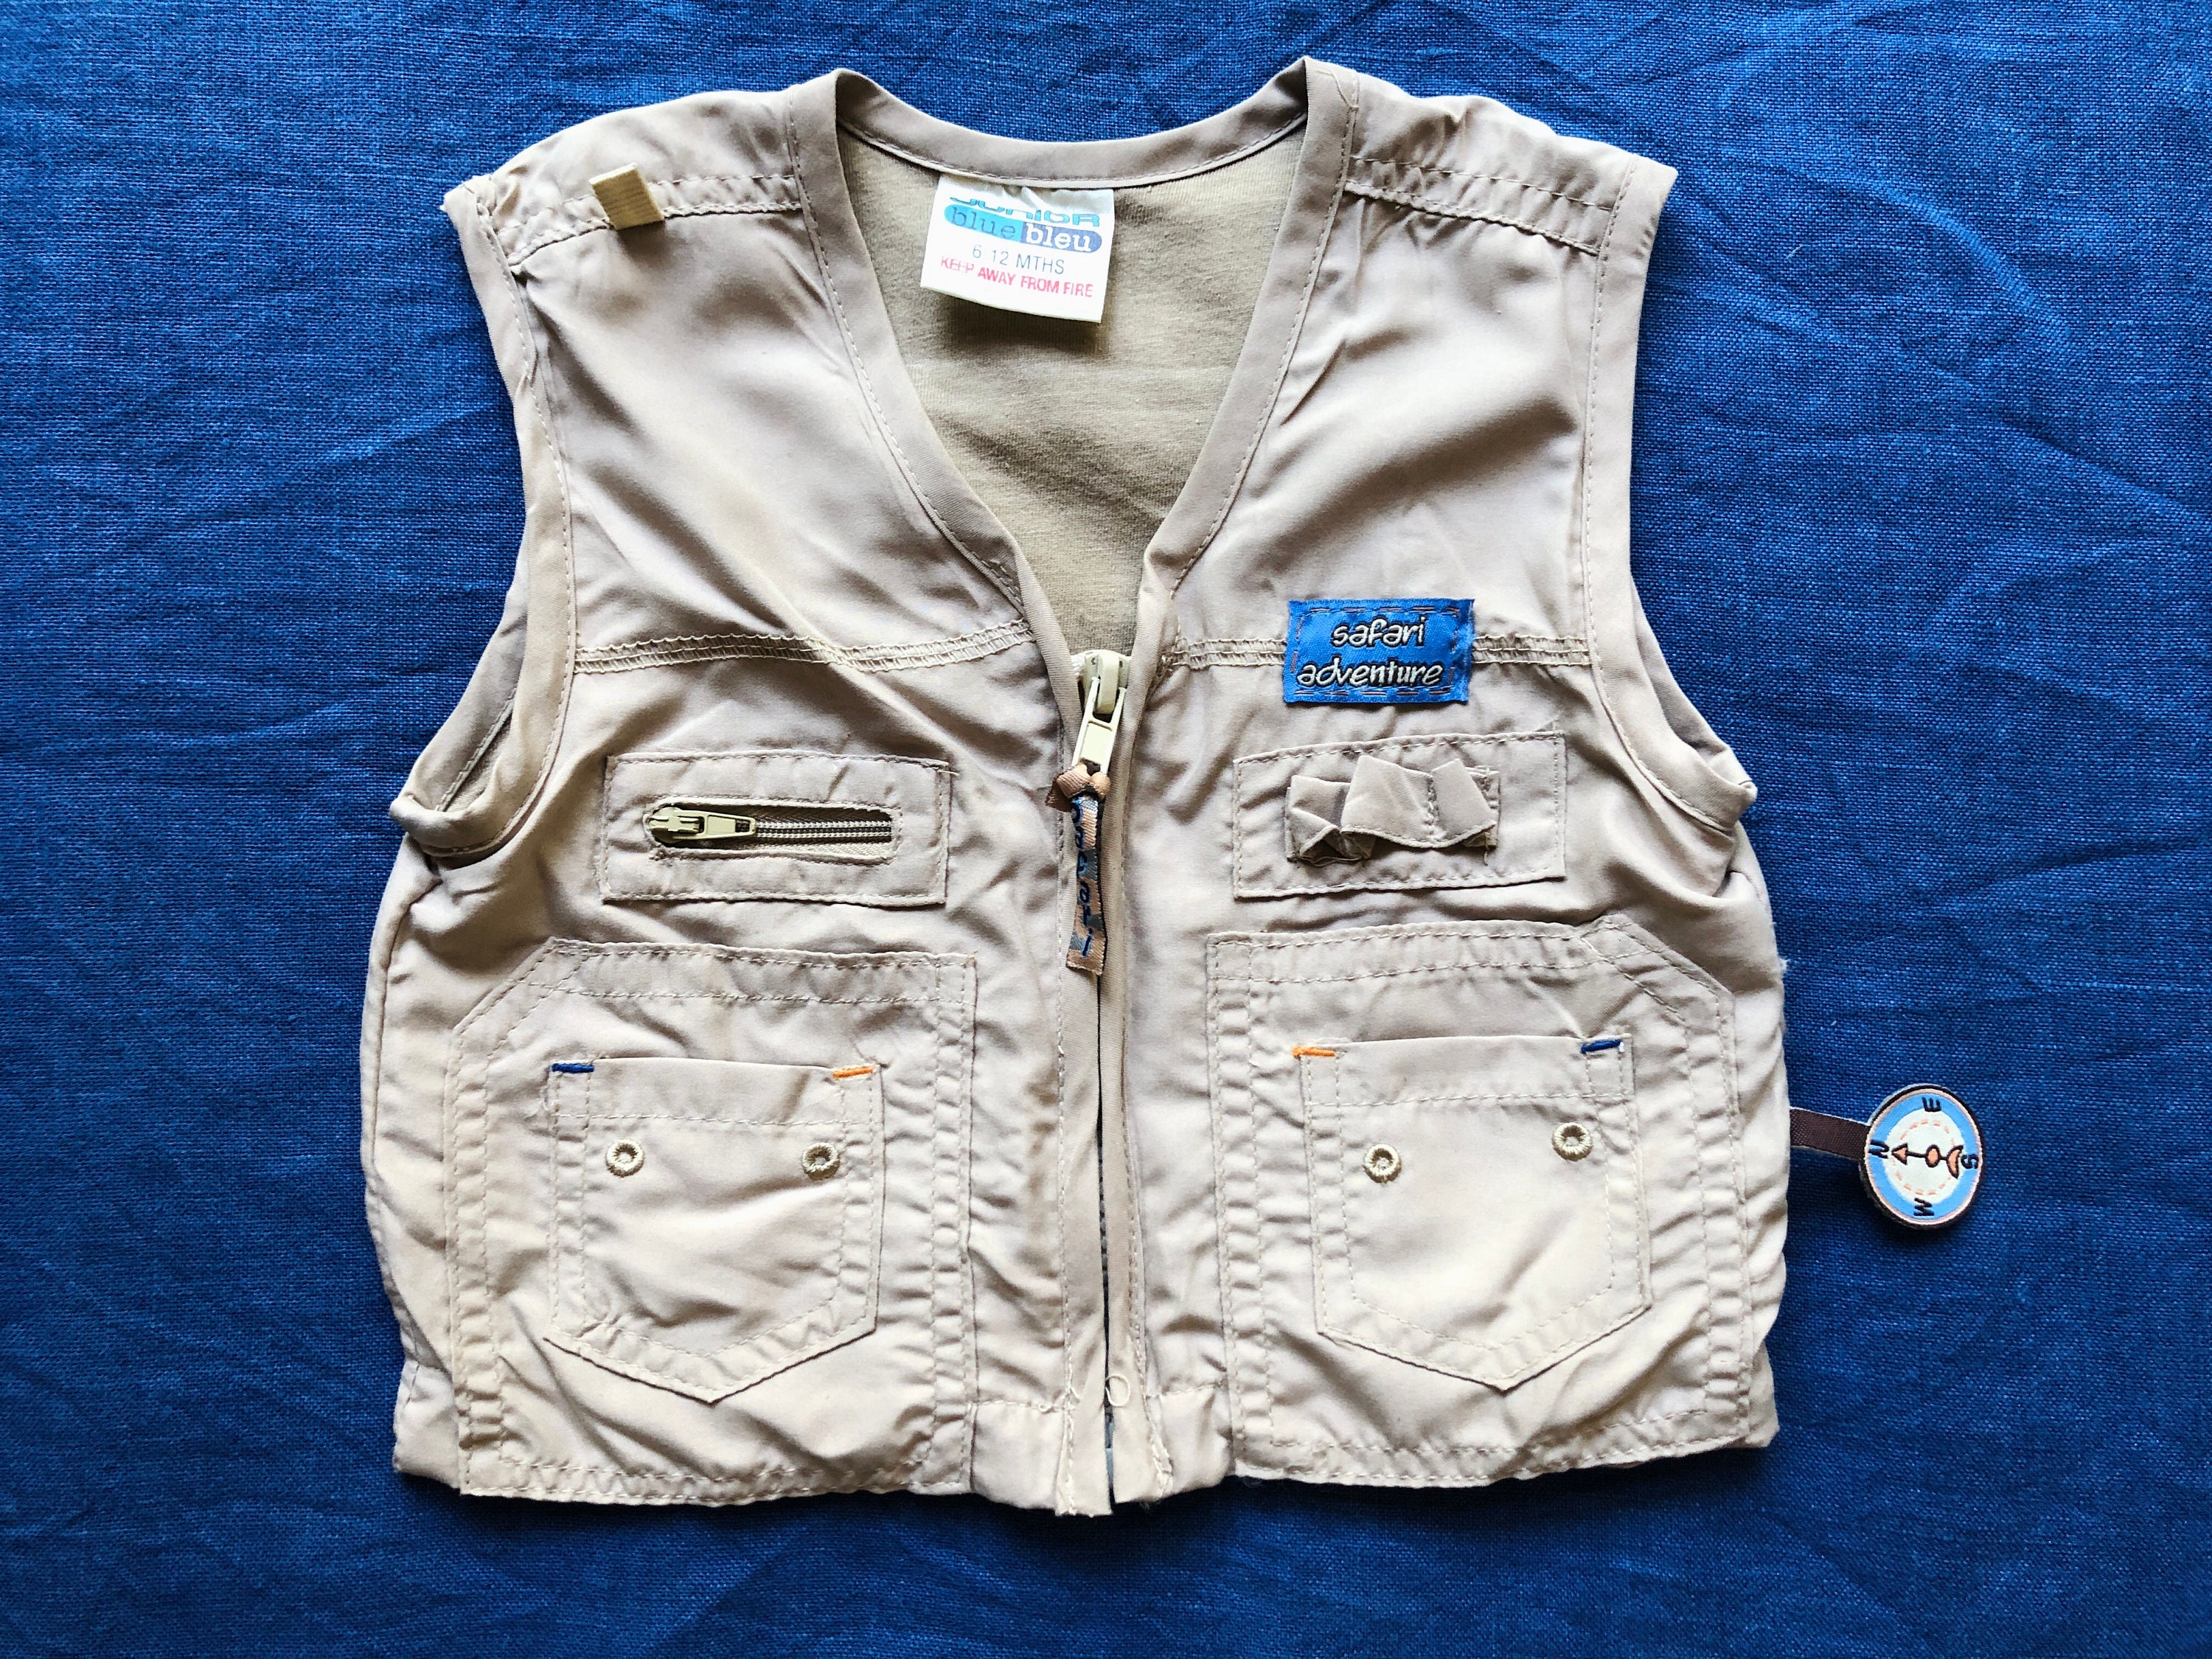 Crystal River Utility Fishing Fly Poly-Cotton Vest Tan X-Large